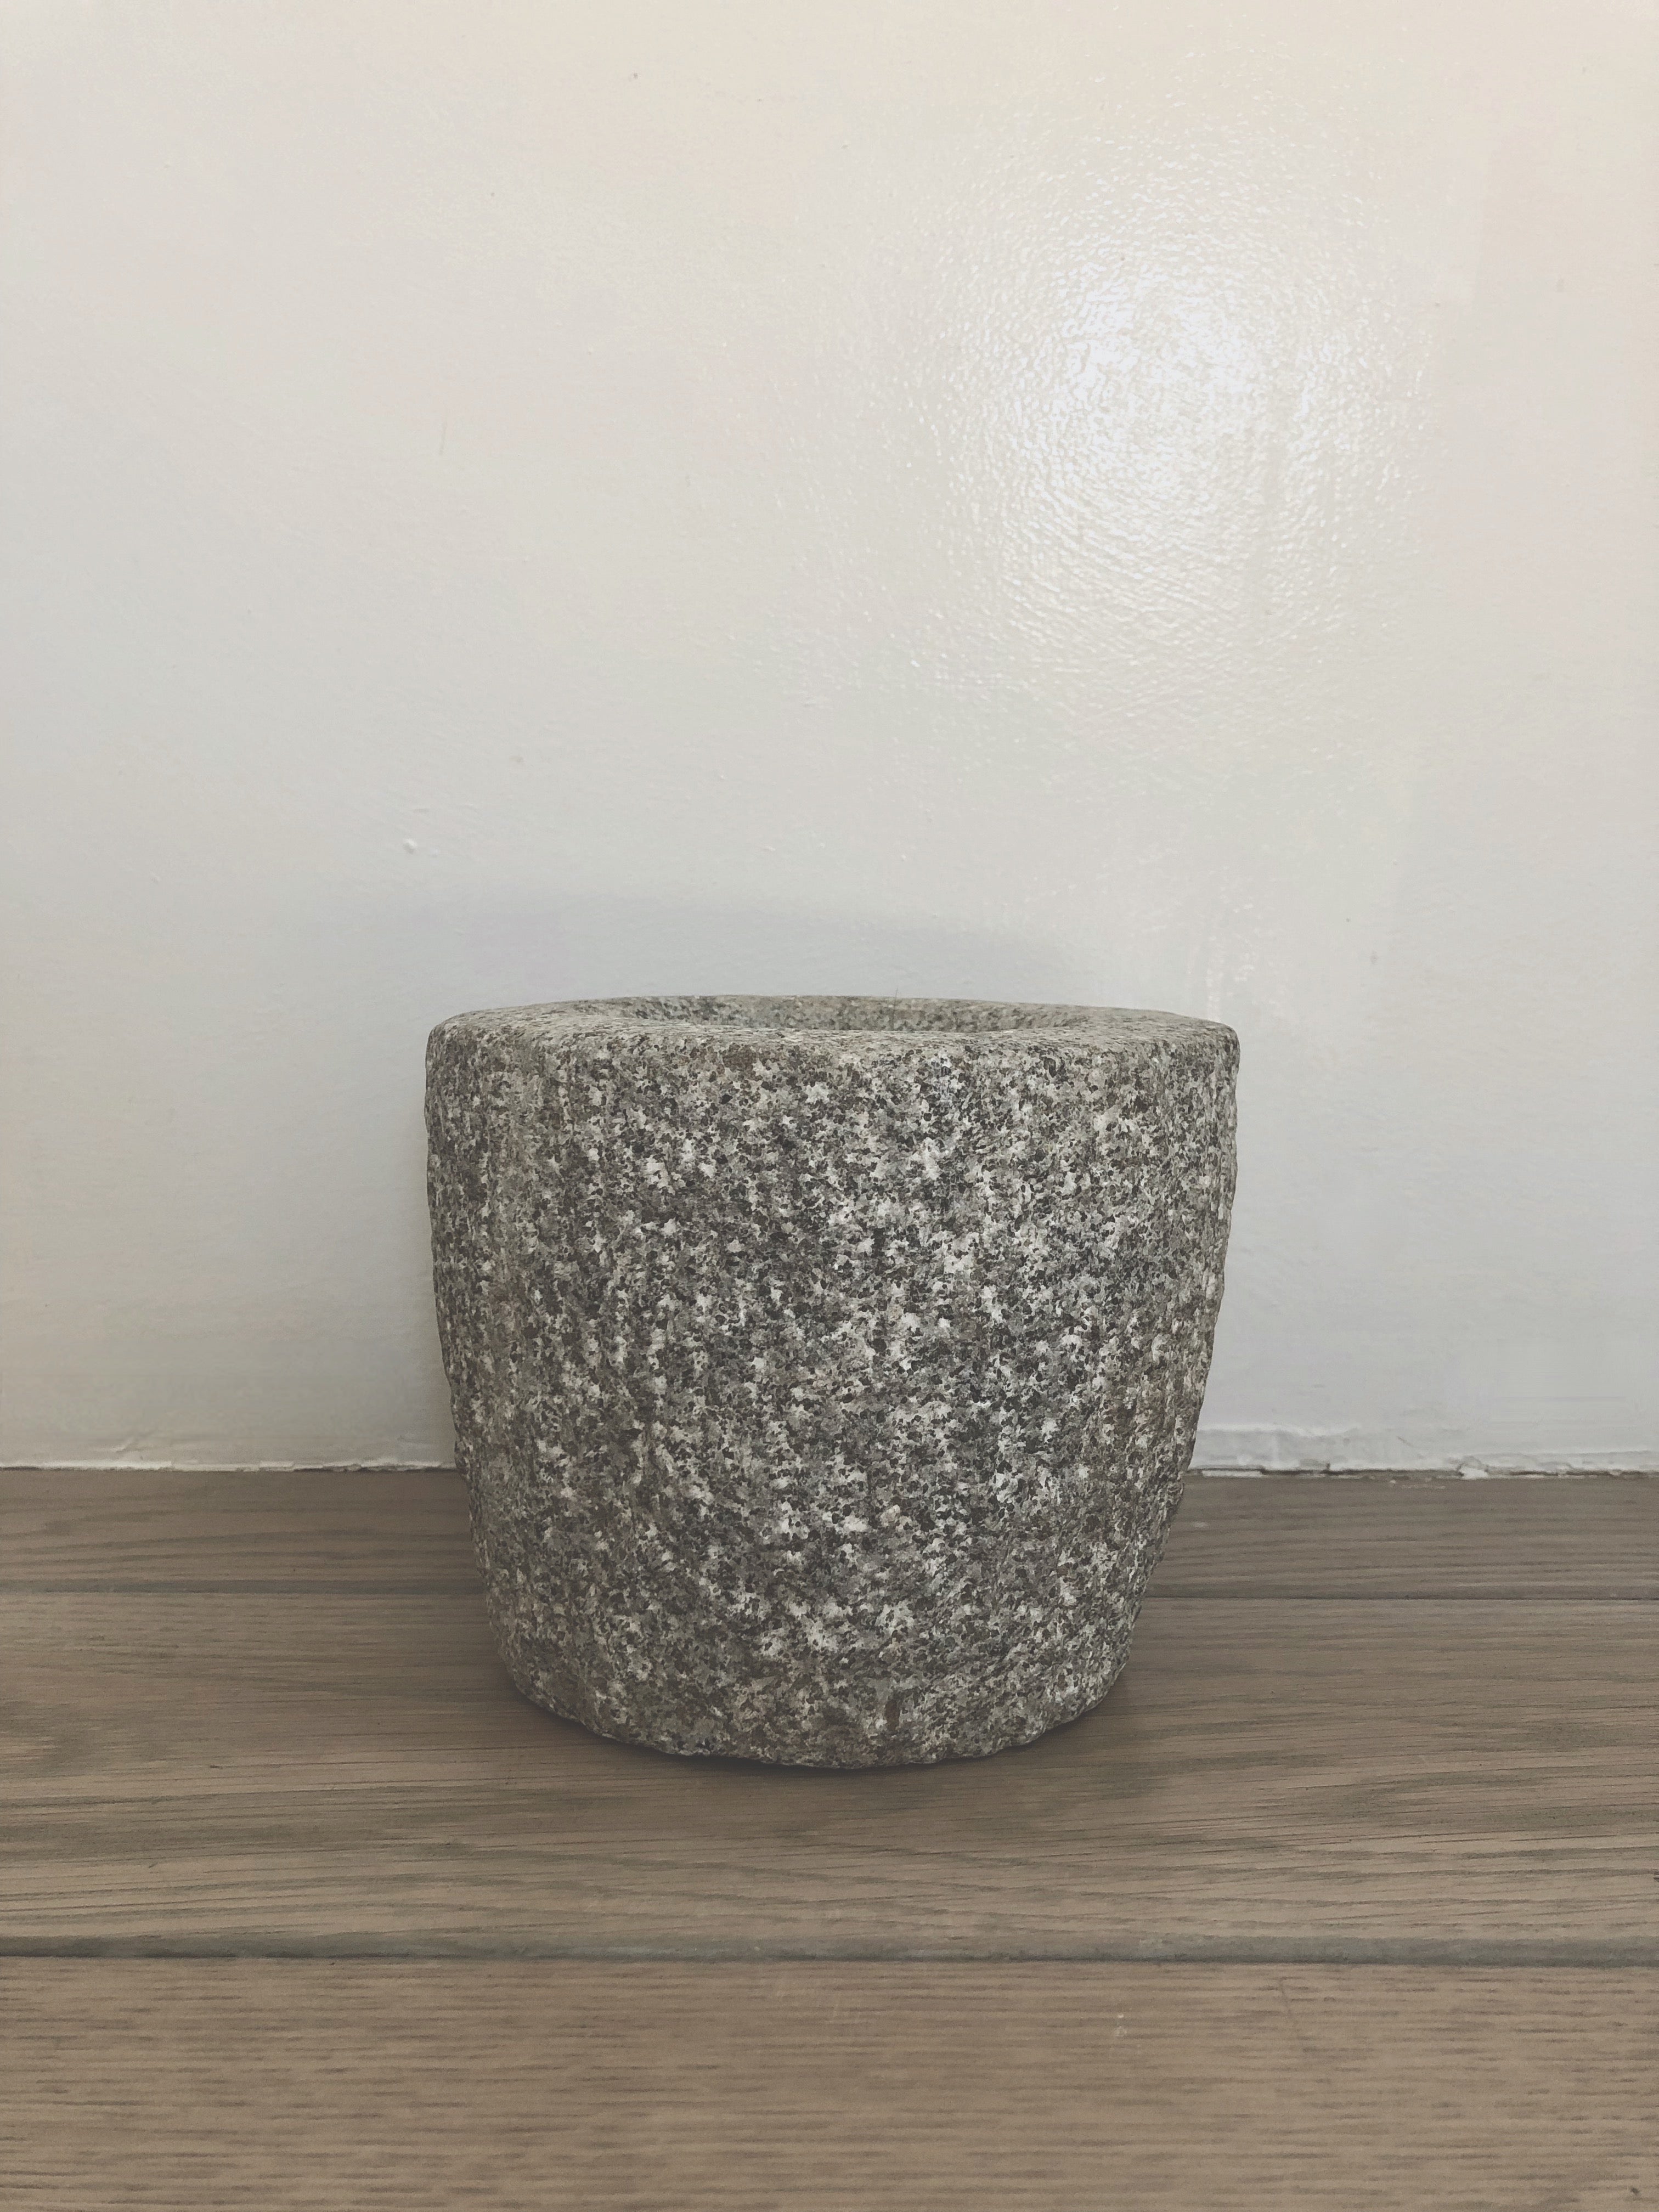 Vintage Swedish mortar with shallow pitch in aged light grey stone. Beautiful decorative object for the kitchen.